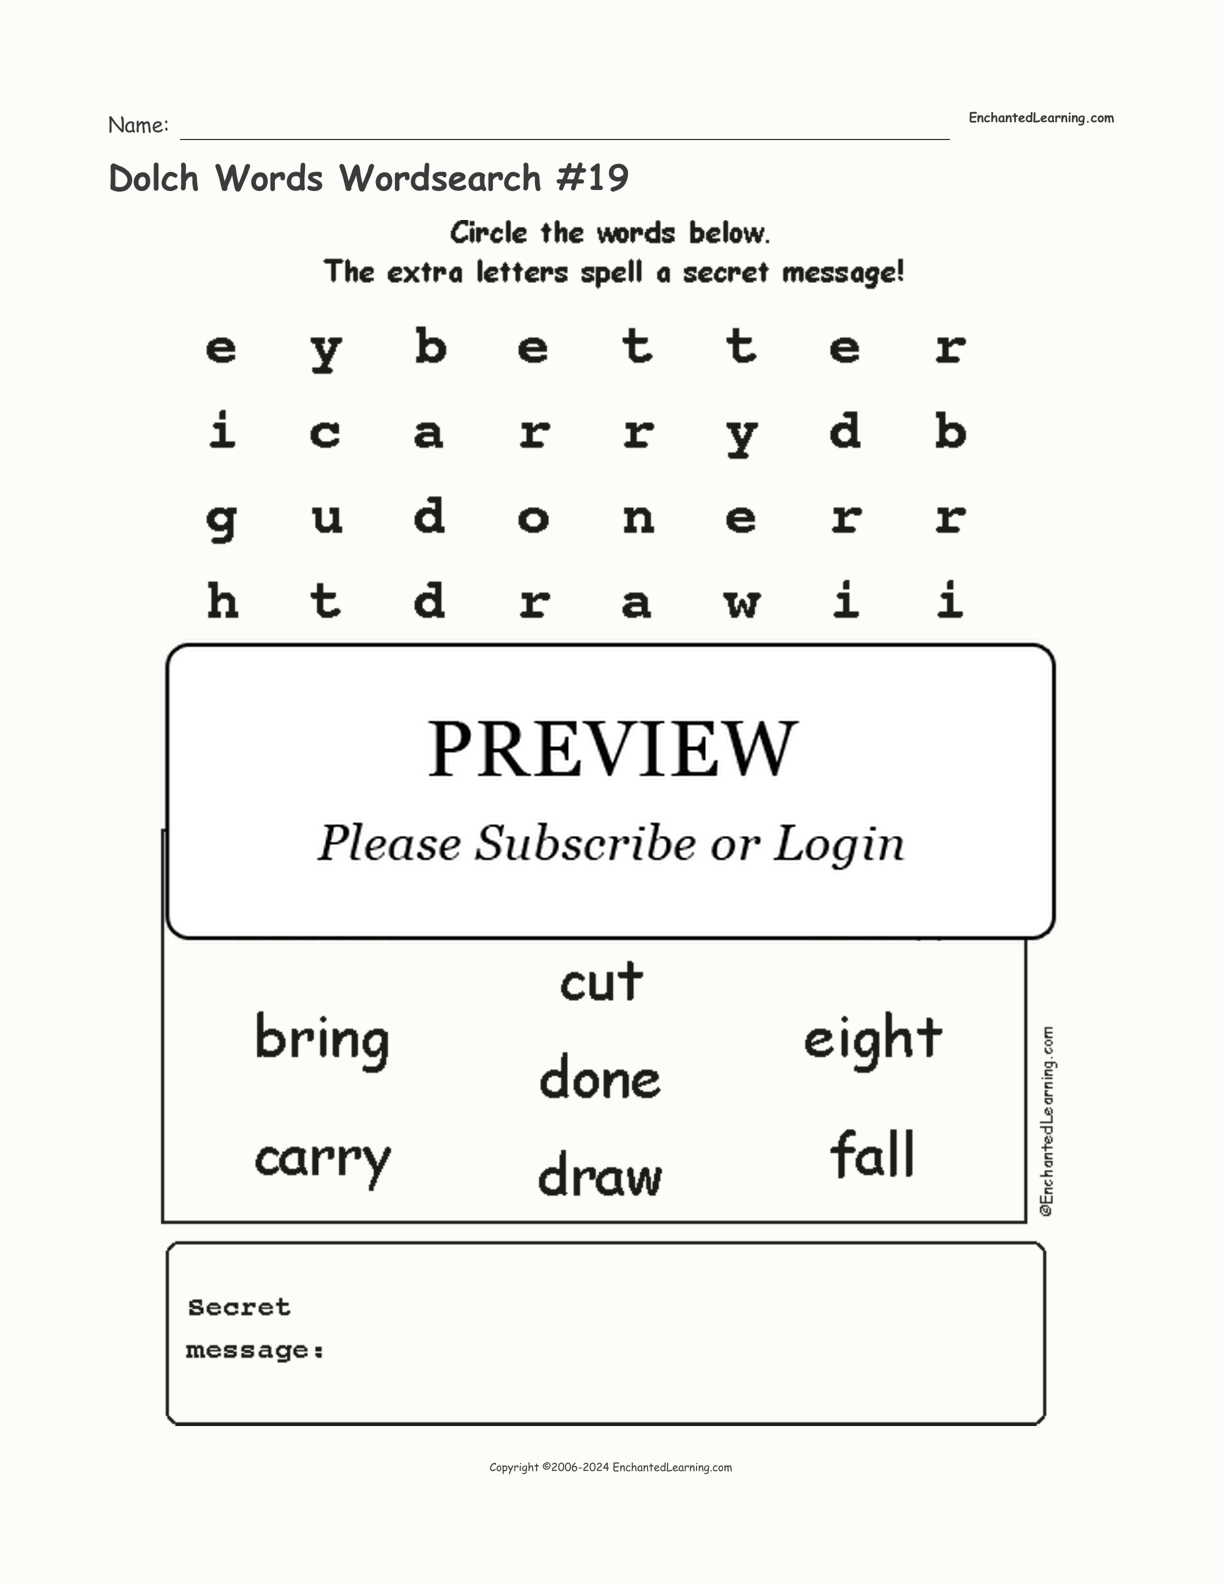 Dolch Words Wordsearch #19 interactive worksheet page 1